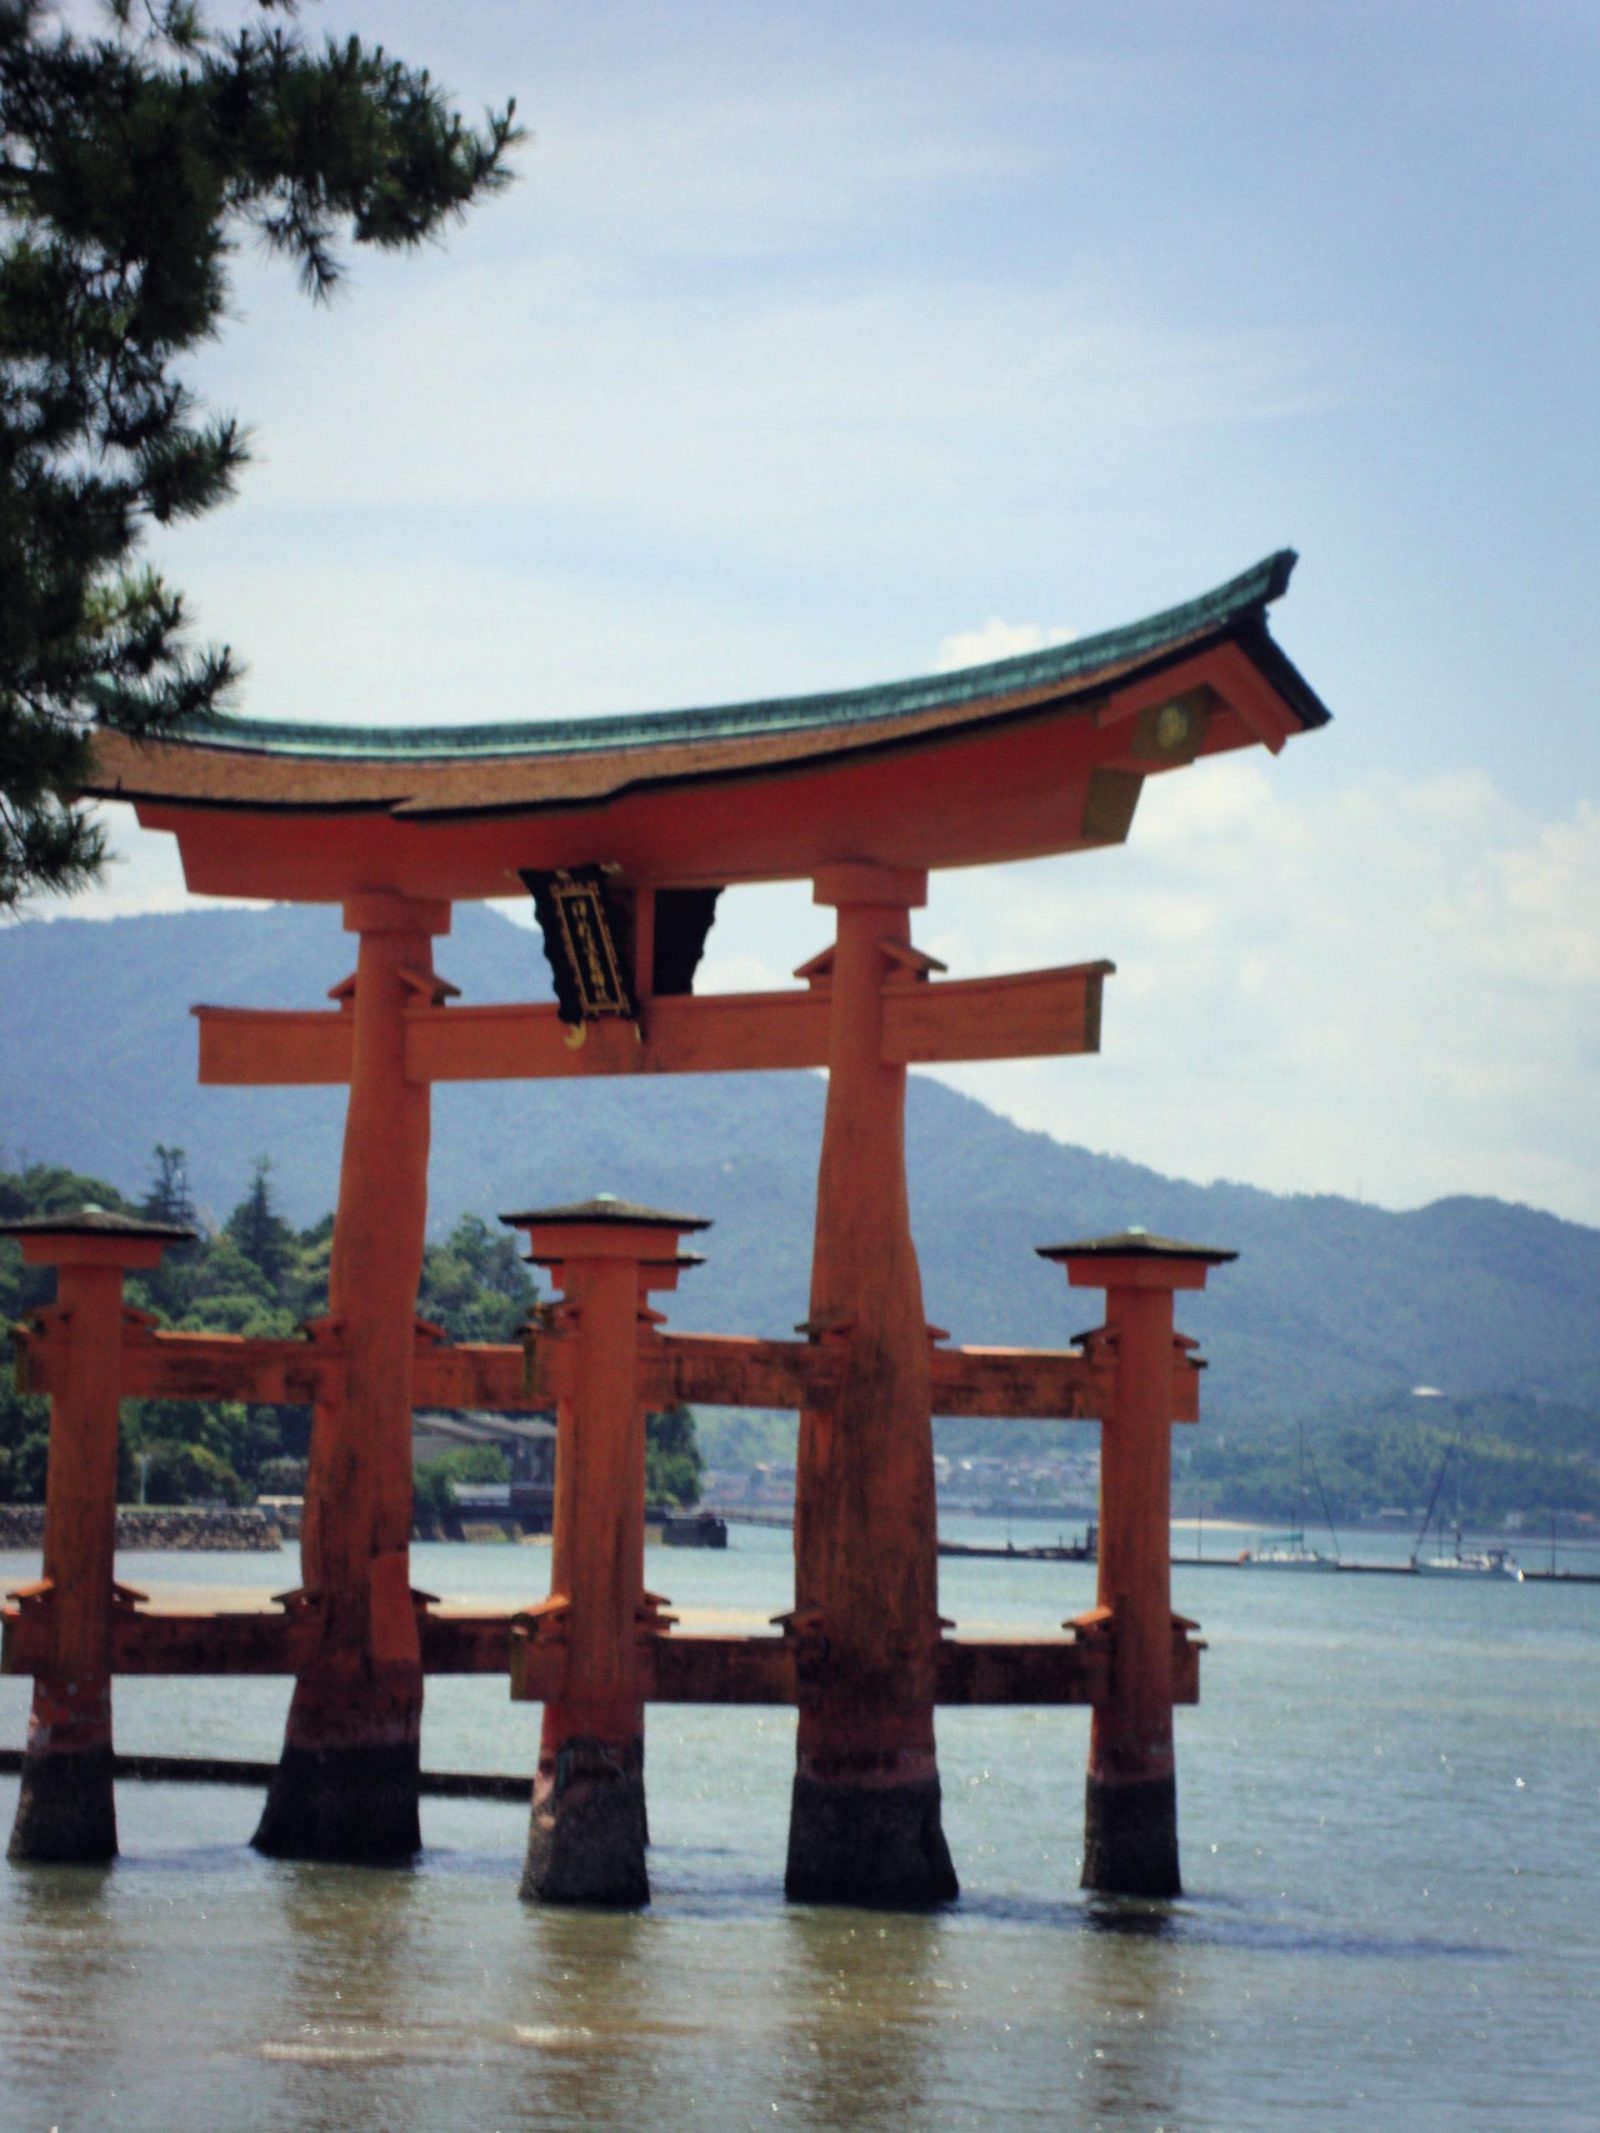 Miyajima island floating torii gate: the floating torii is a must-see for your trip to Japan. Here is a Miyajima travel guide for your adventure.